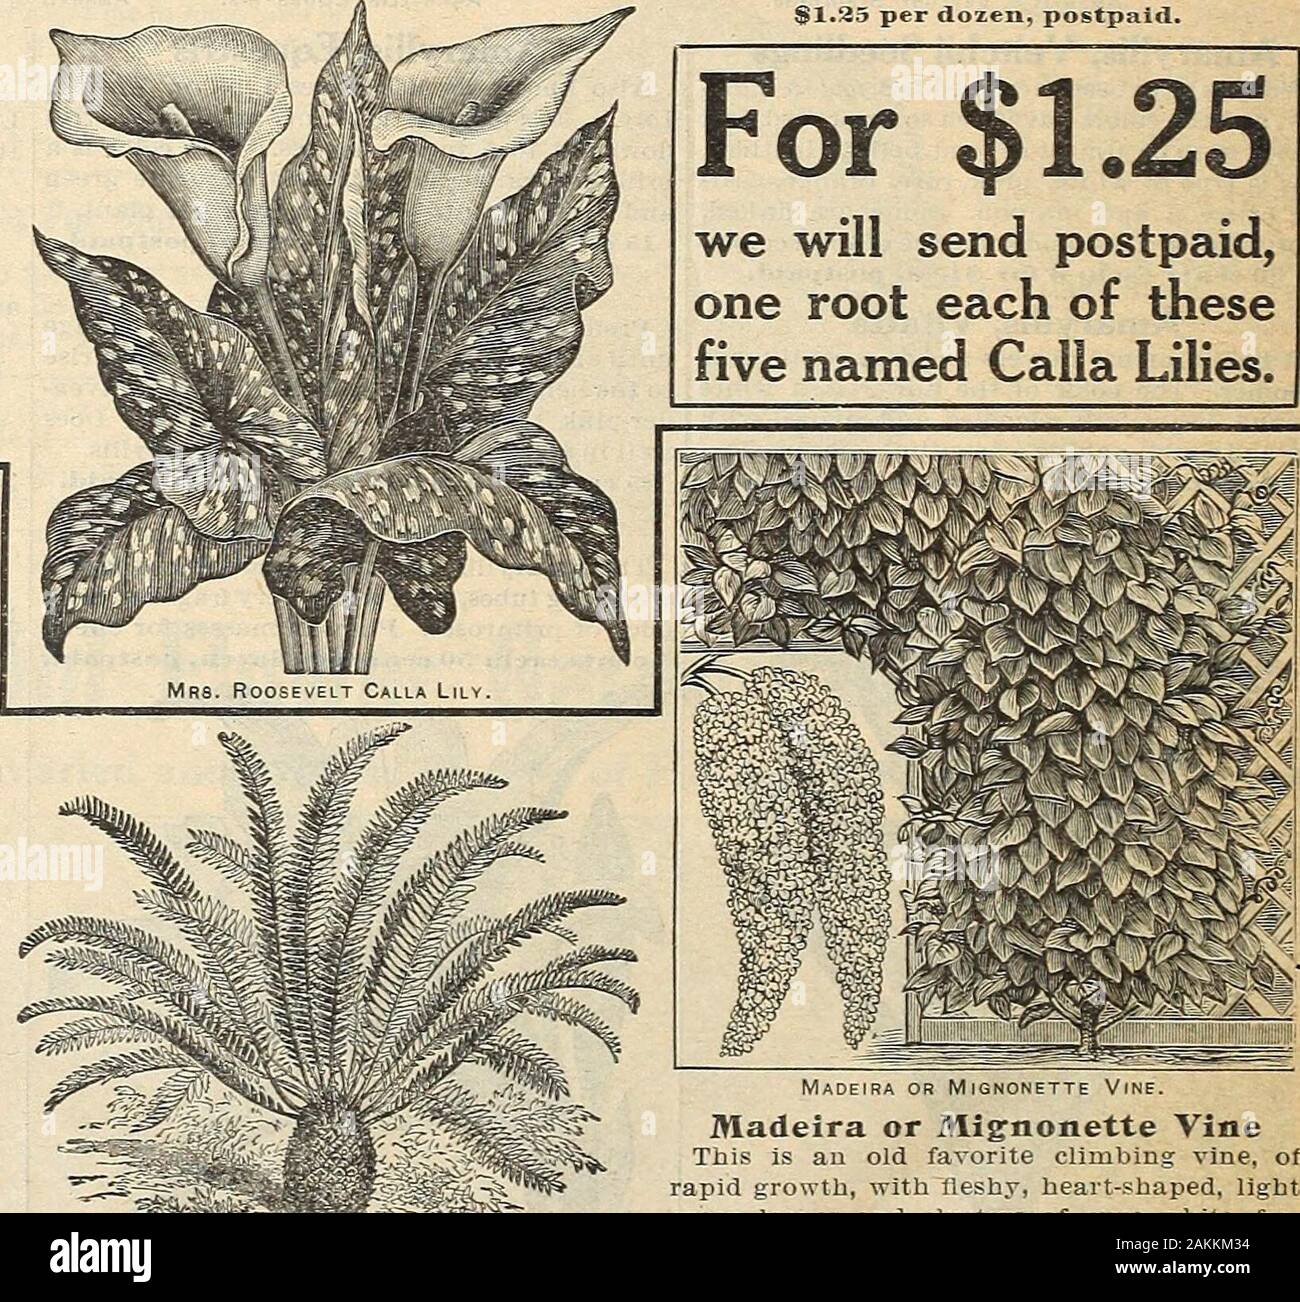 The Maule seed book : 1917 . Trto TRITOMA Red Hot Poker, Flame Flower, Torch Lily.FFITZERI. -Rich orange scarlet. Heads, 12inches long. Elegant for cut flowers or vases.25 cents each; 3 for GO cents, postpaid. BLETIA, HYACINTHINA Grows 1 foot high. This bulb grows best In adamp, shady place. Grass-like foliage, longracemes of showy rosy-pink flowers. /SO cents each; SI.75 per dozen, postpaid*. Spotted Leaf Calla Lily. Spotted Leaf Calla This magnificent calla has glossy, dark greenleaves, nicely dotted with numerous whitespots. The flowers are pure white, with blackcentres, and are A-ery beaut Stock Photo